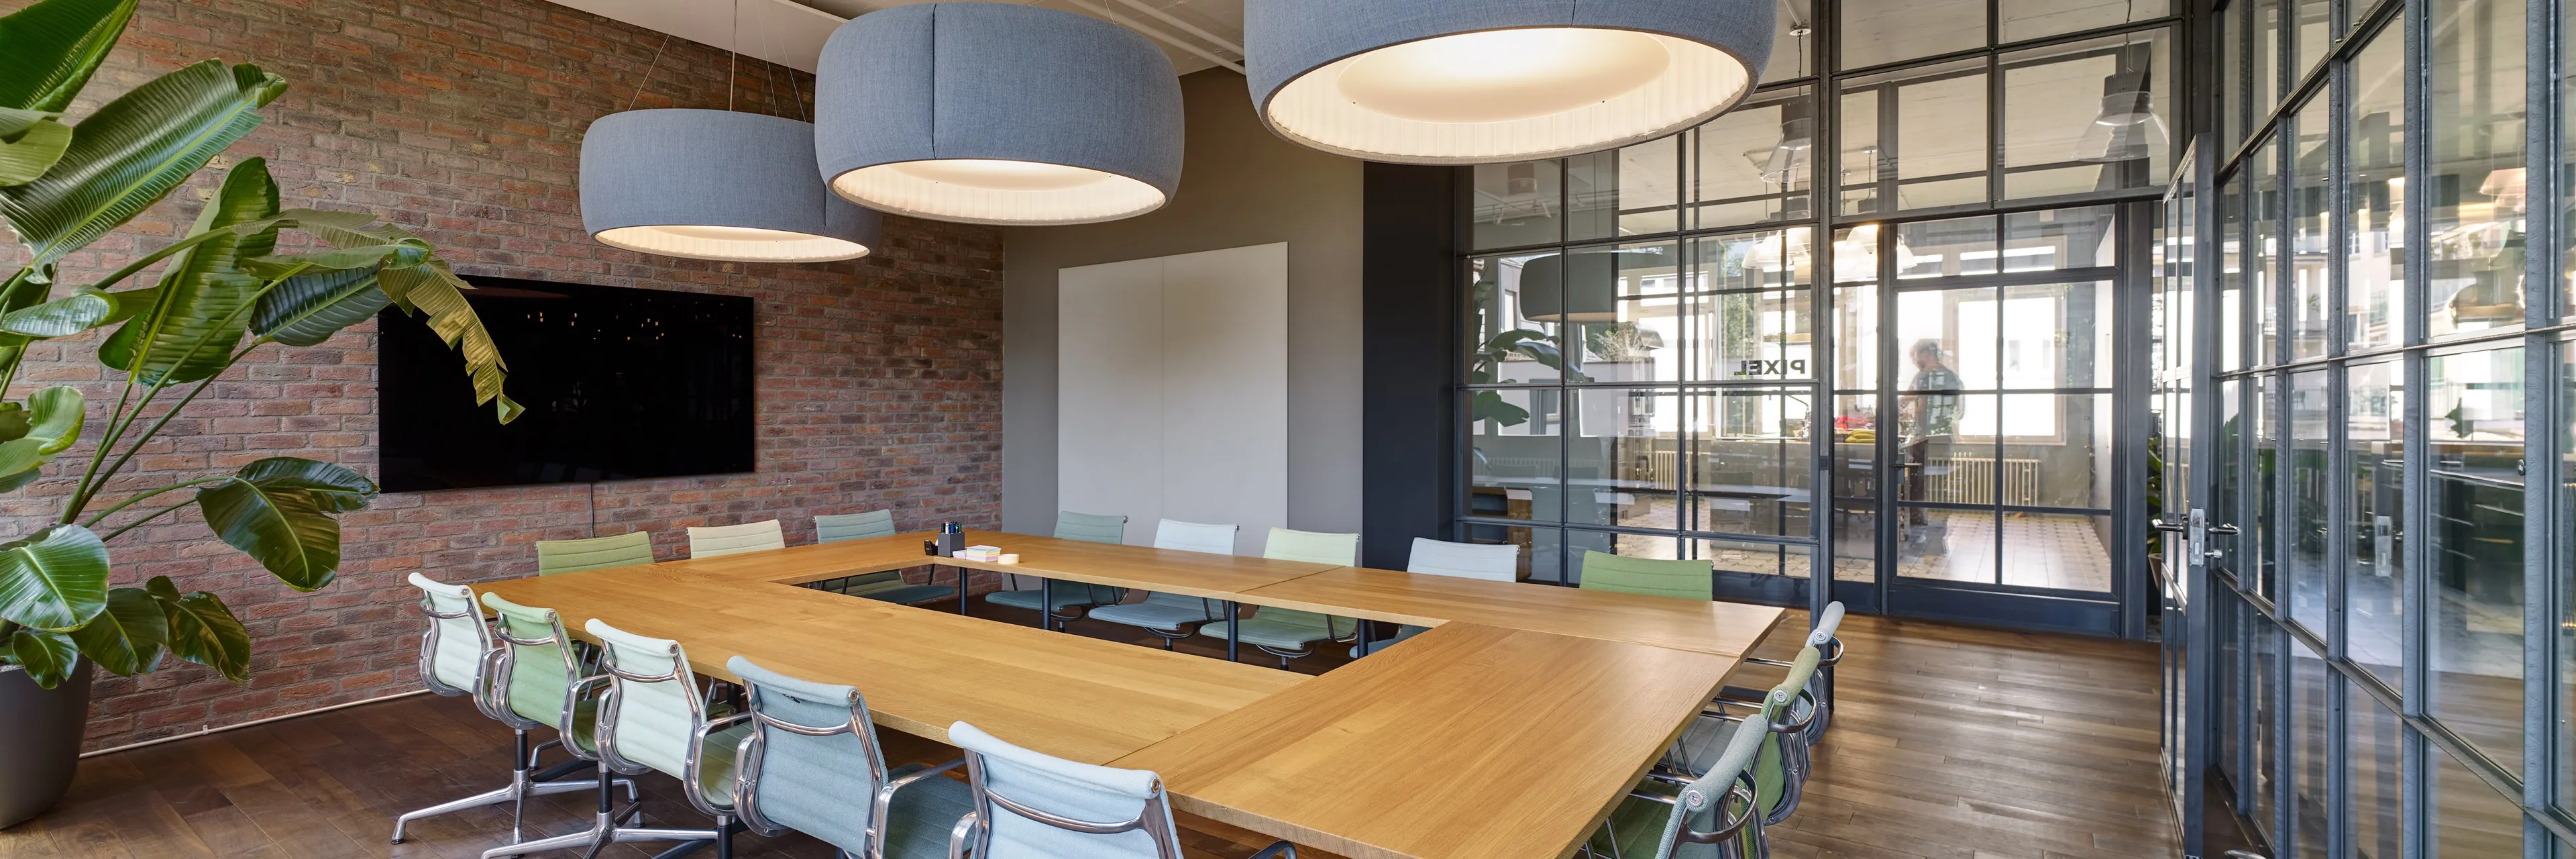 Modern and well-equipped meeting room at Ginetta Workspace, showcasing a professional setting for business discussions and collaborative work.